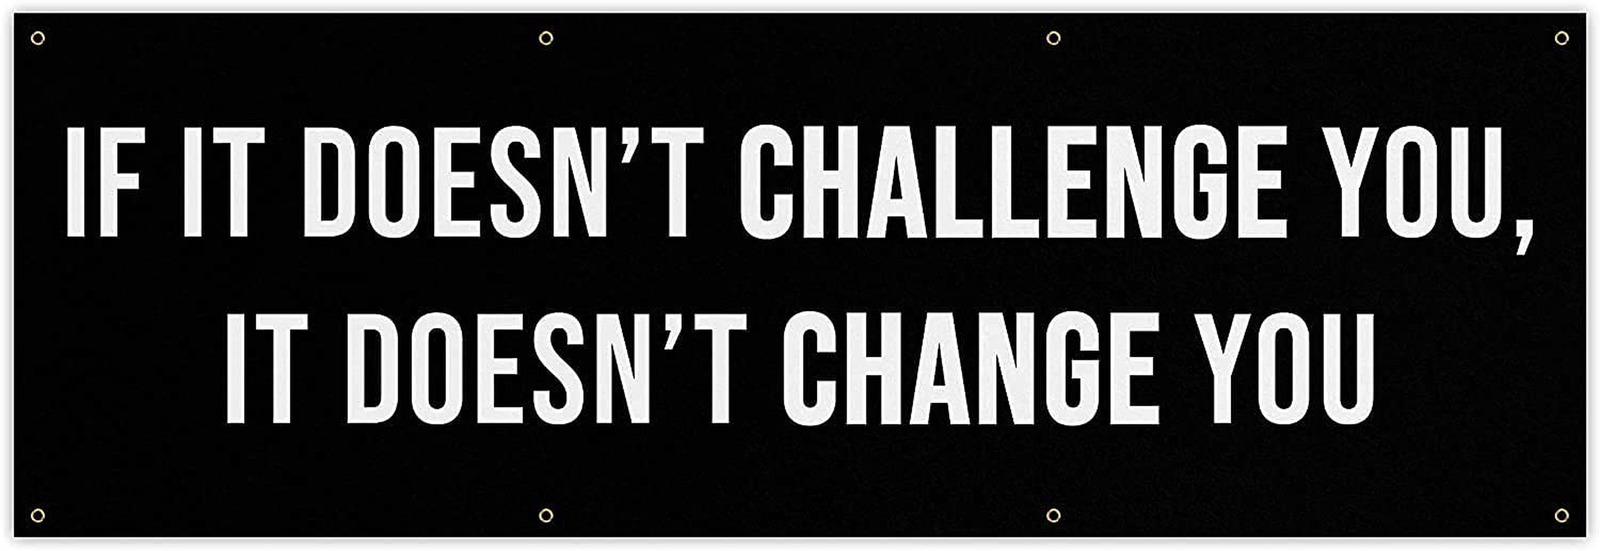 If It Doesn't Challenge Banner - Motivational Home Gym - Art (36 X 12 Inches)